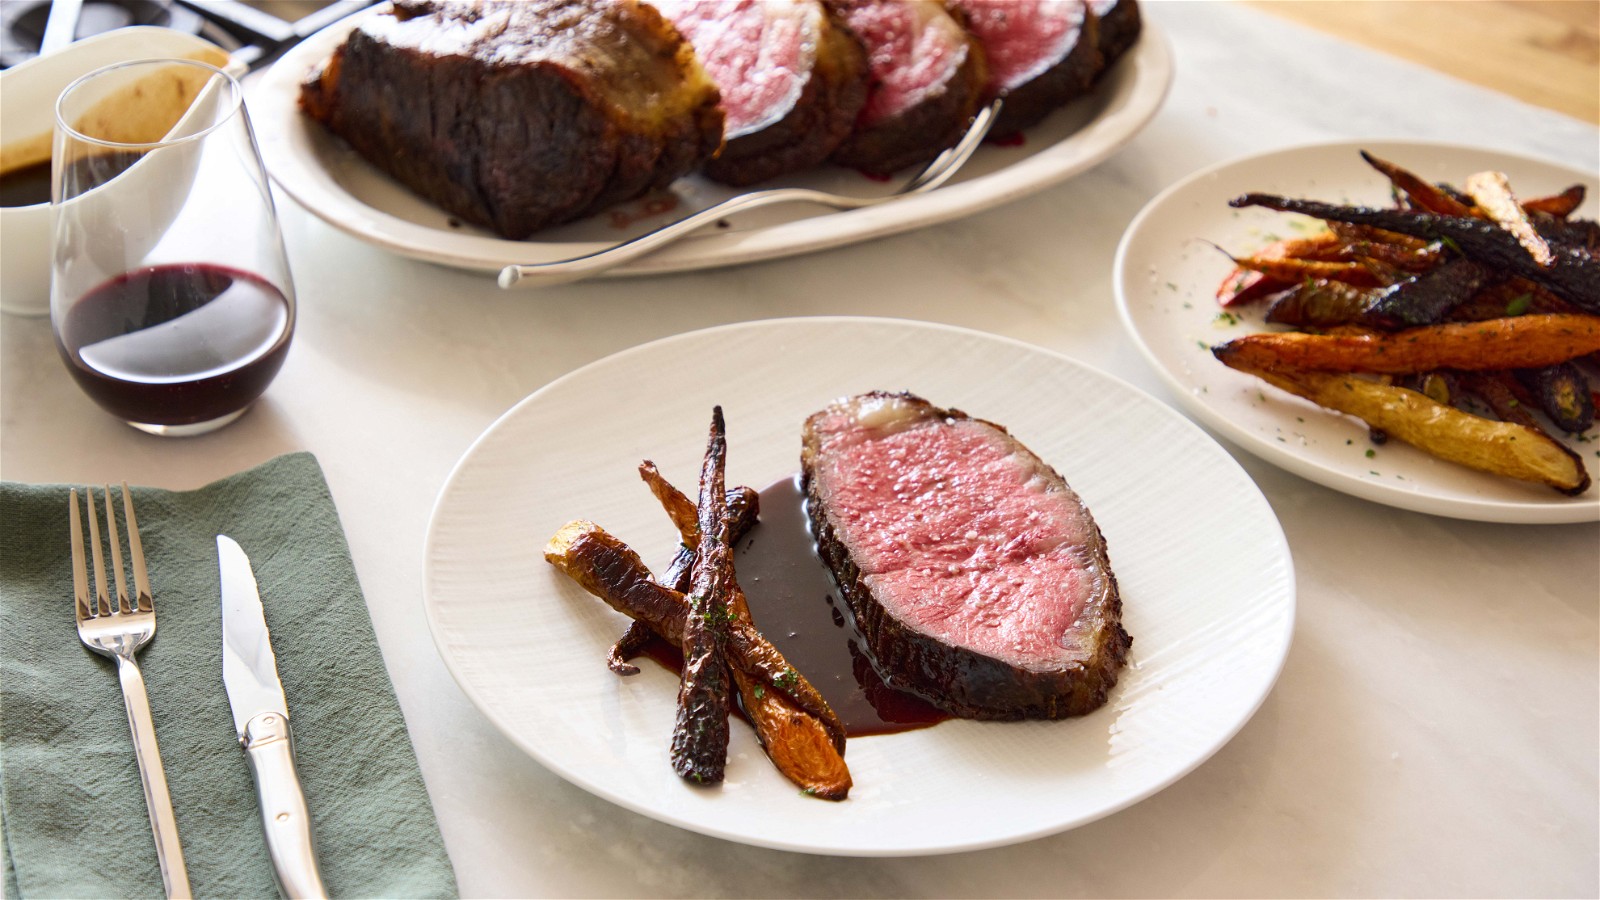 Image of Thomas Keller's Oven Roasted Prime Beef Striploin w/ Red Wine Shallot Sauce